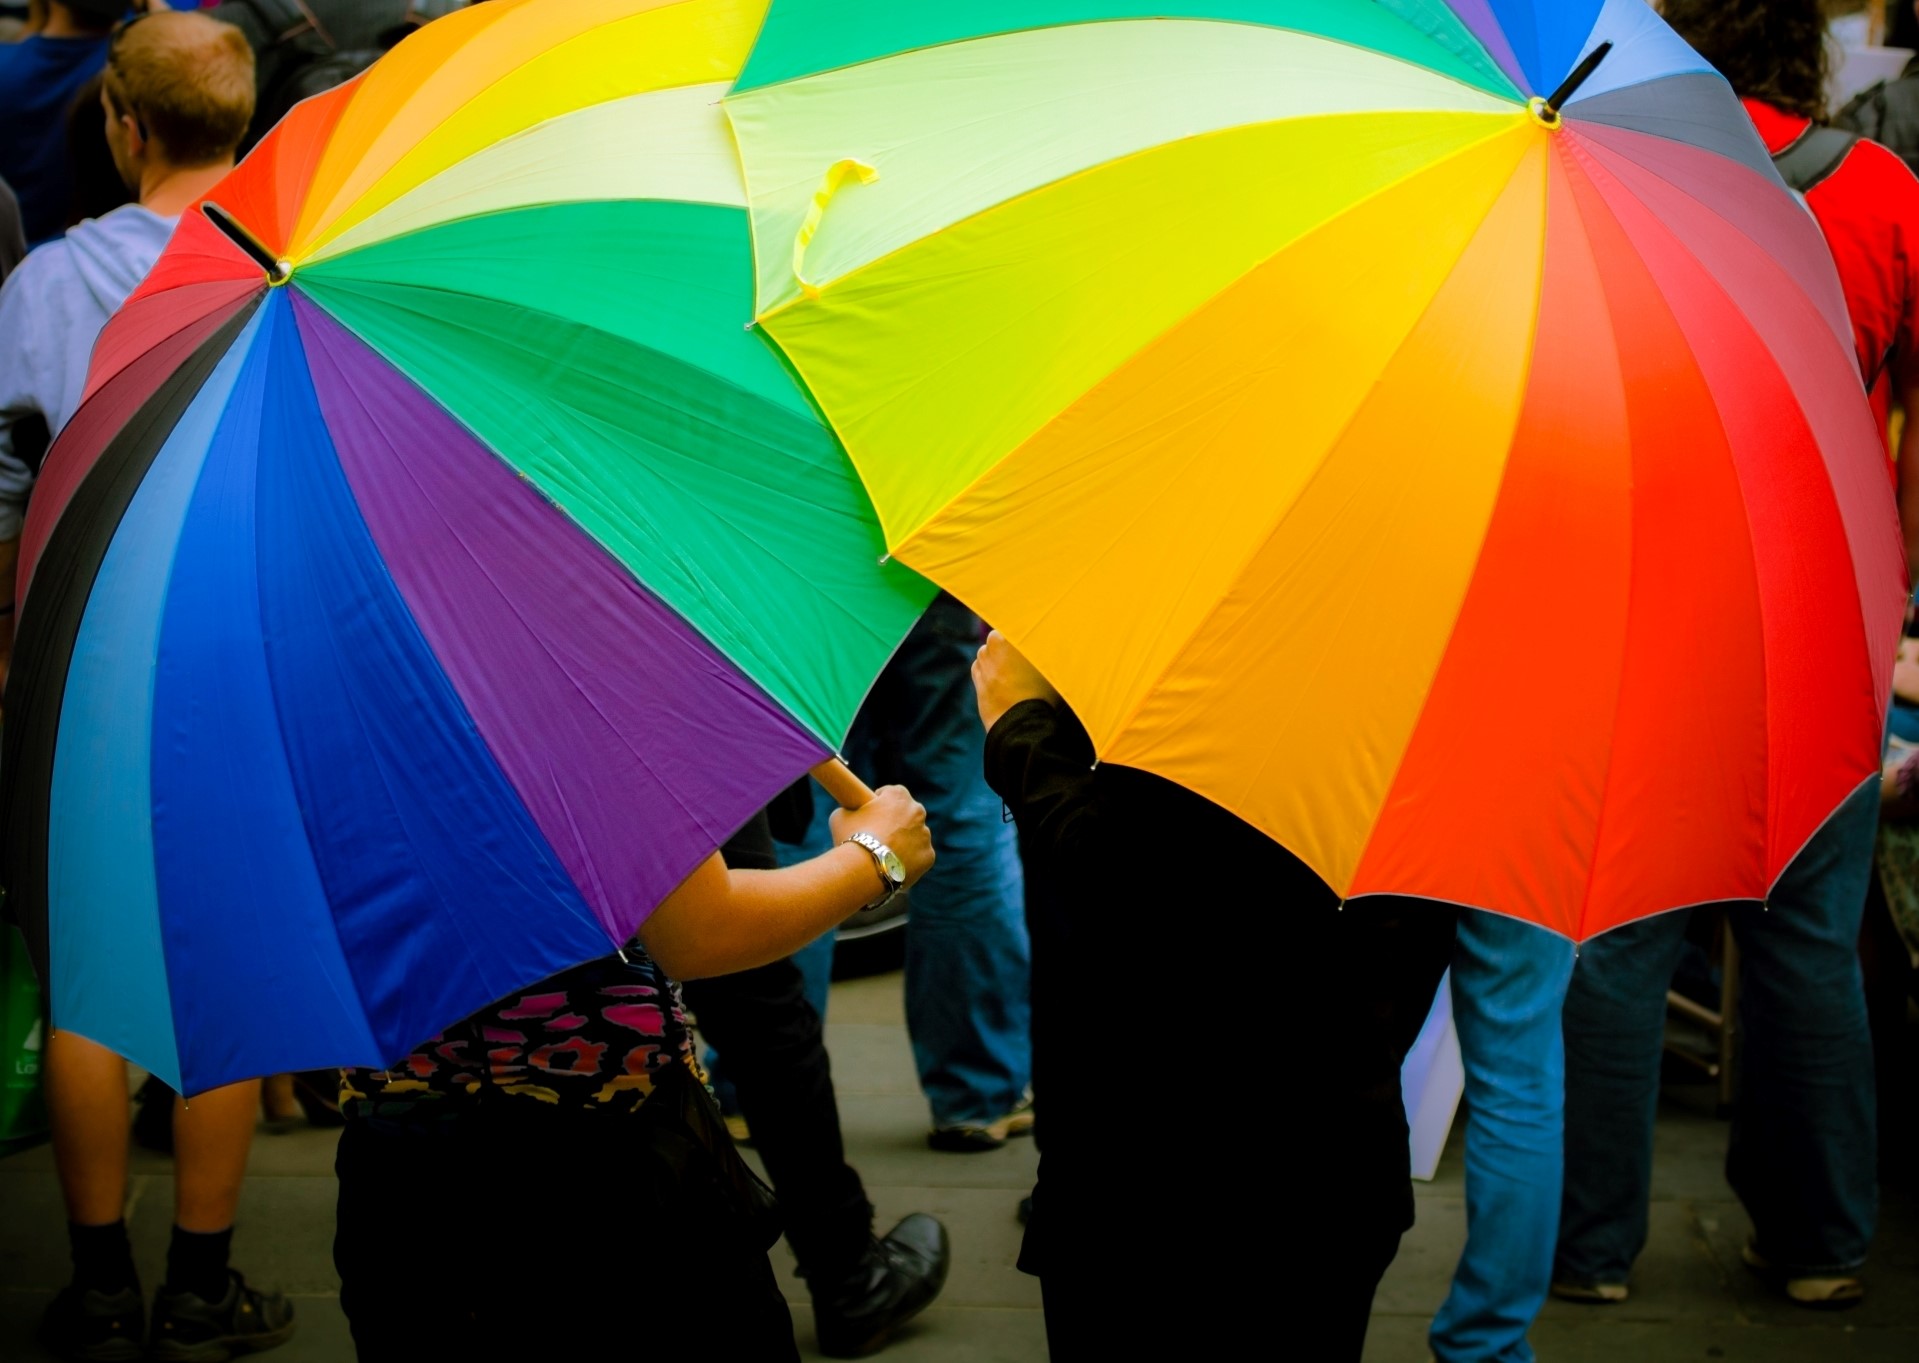 Two people holding rainbow umbrellas that cover them